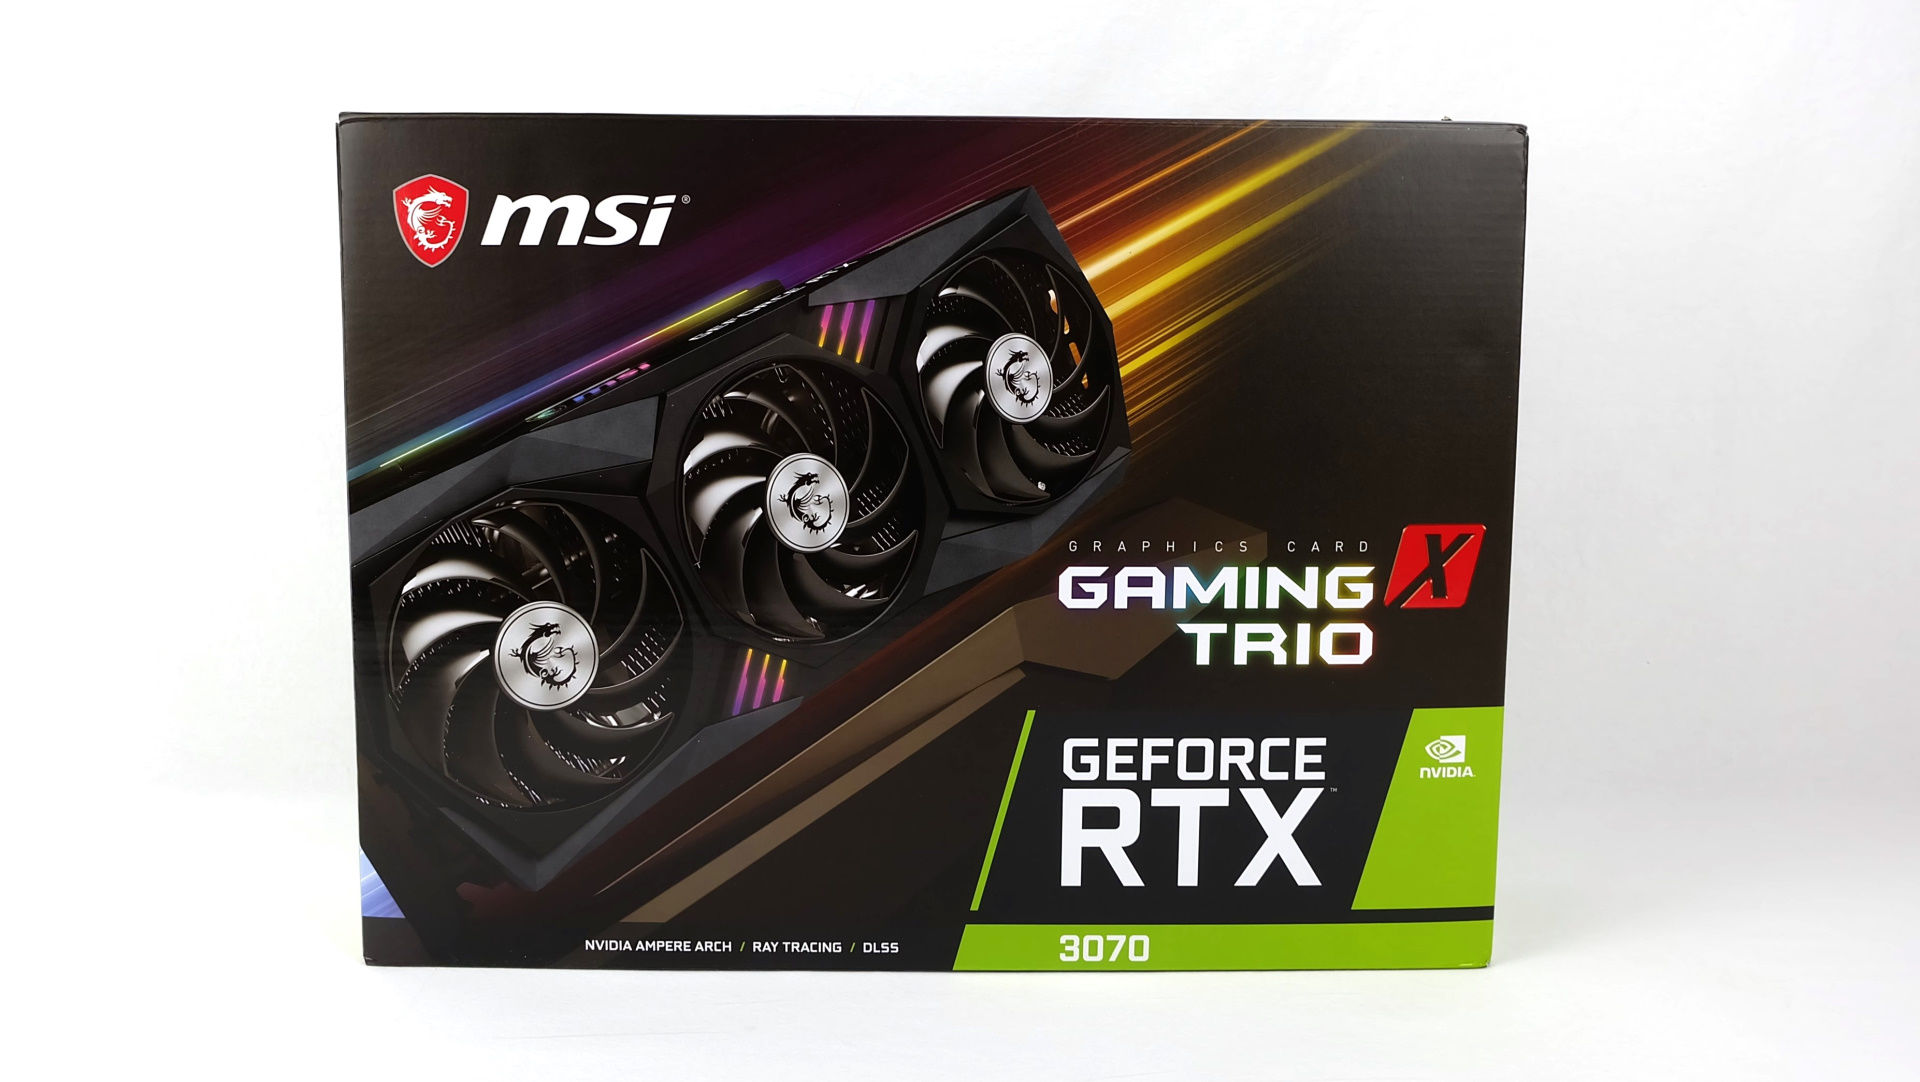 MSI GeForce RTX 3070 Gaming X Trio Review - Introduction